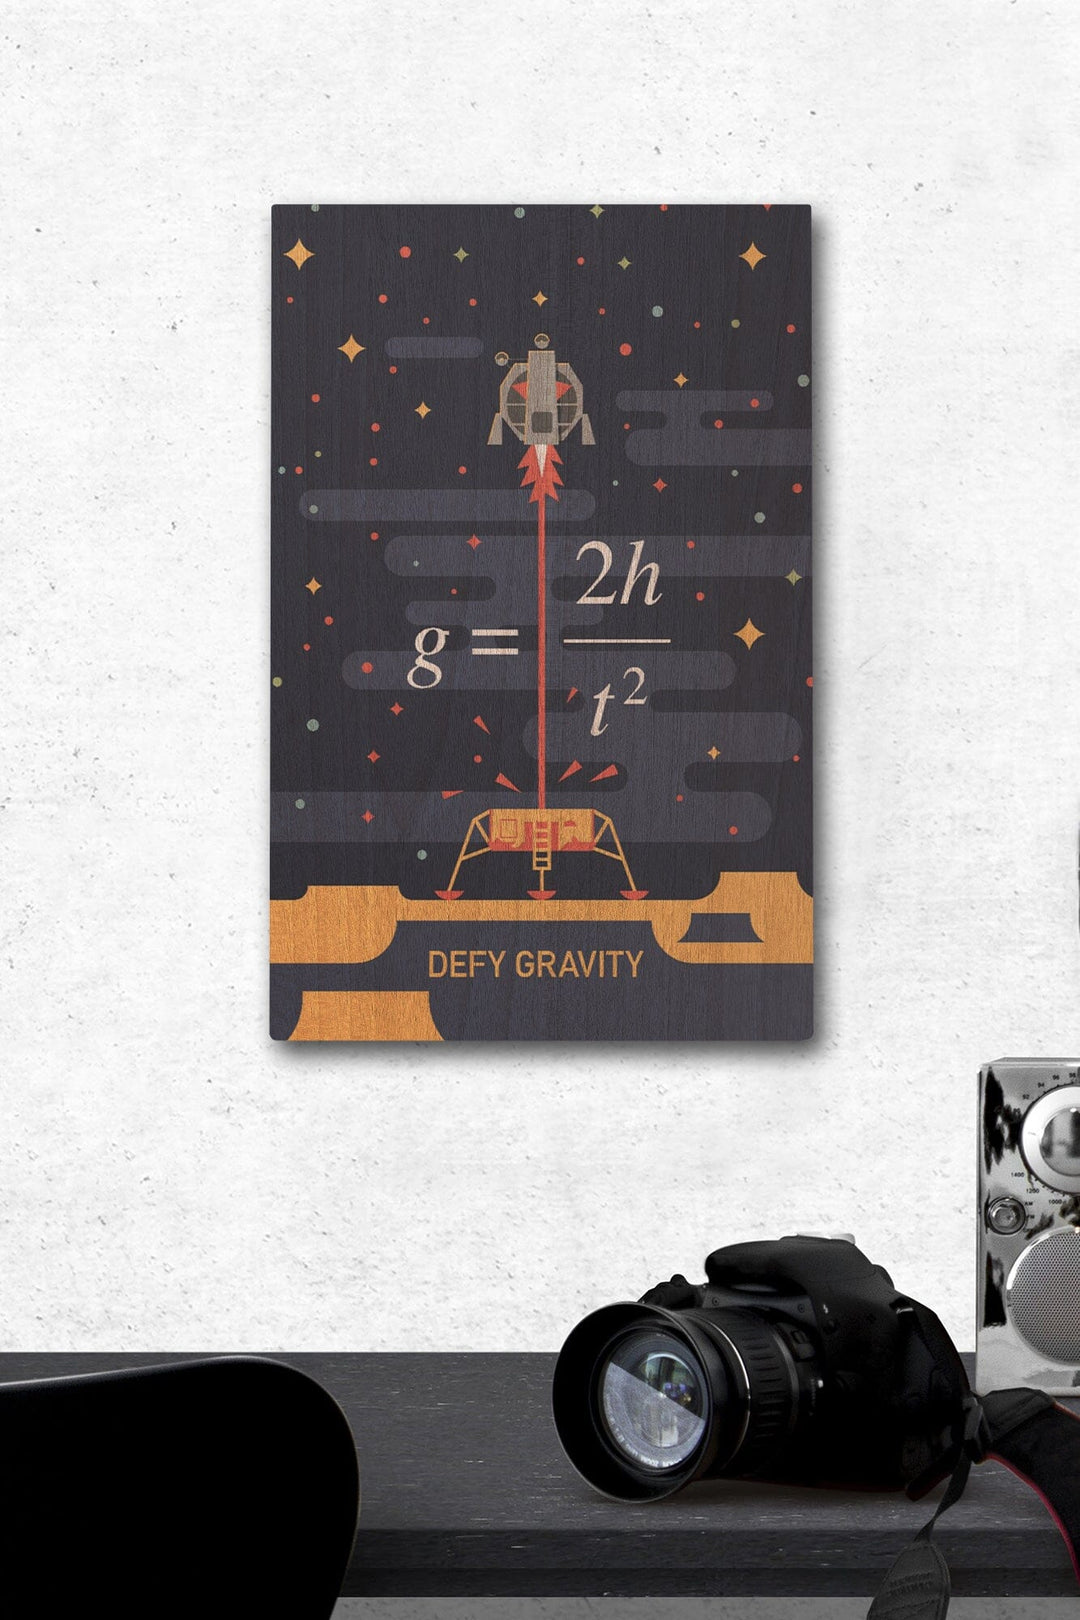 Equations and Emojis Collection, Lunar Lander, Defy Gravity, Wood Signs and Postcards Wood Lantern Press 12 x 18 Wood Gallery Print 